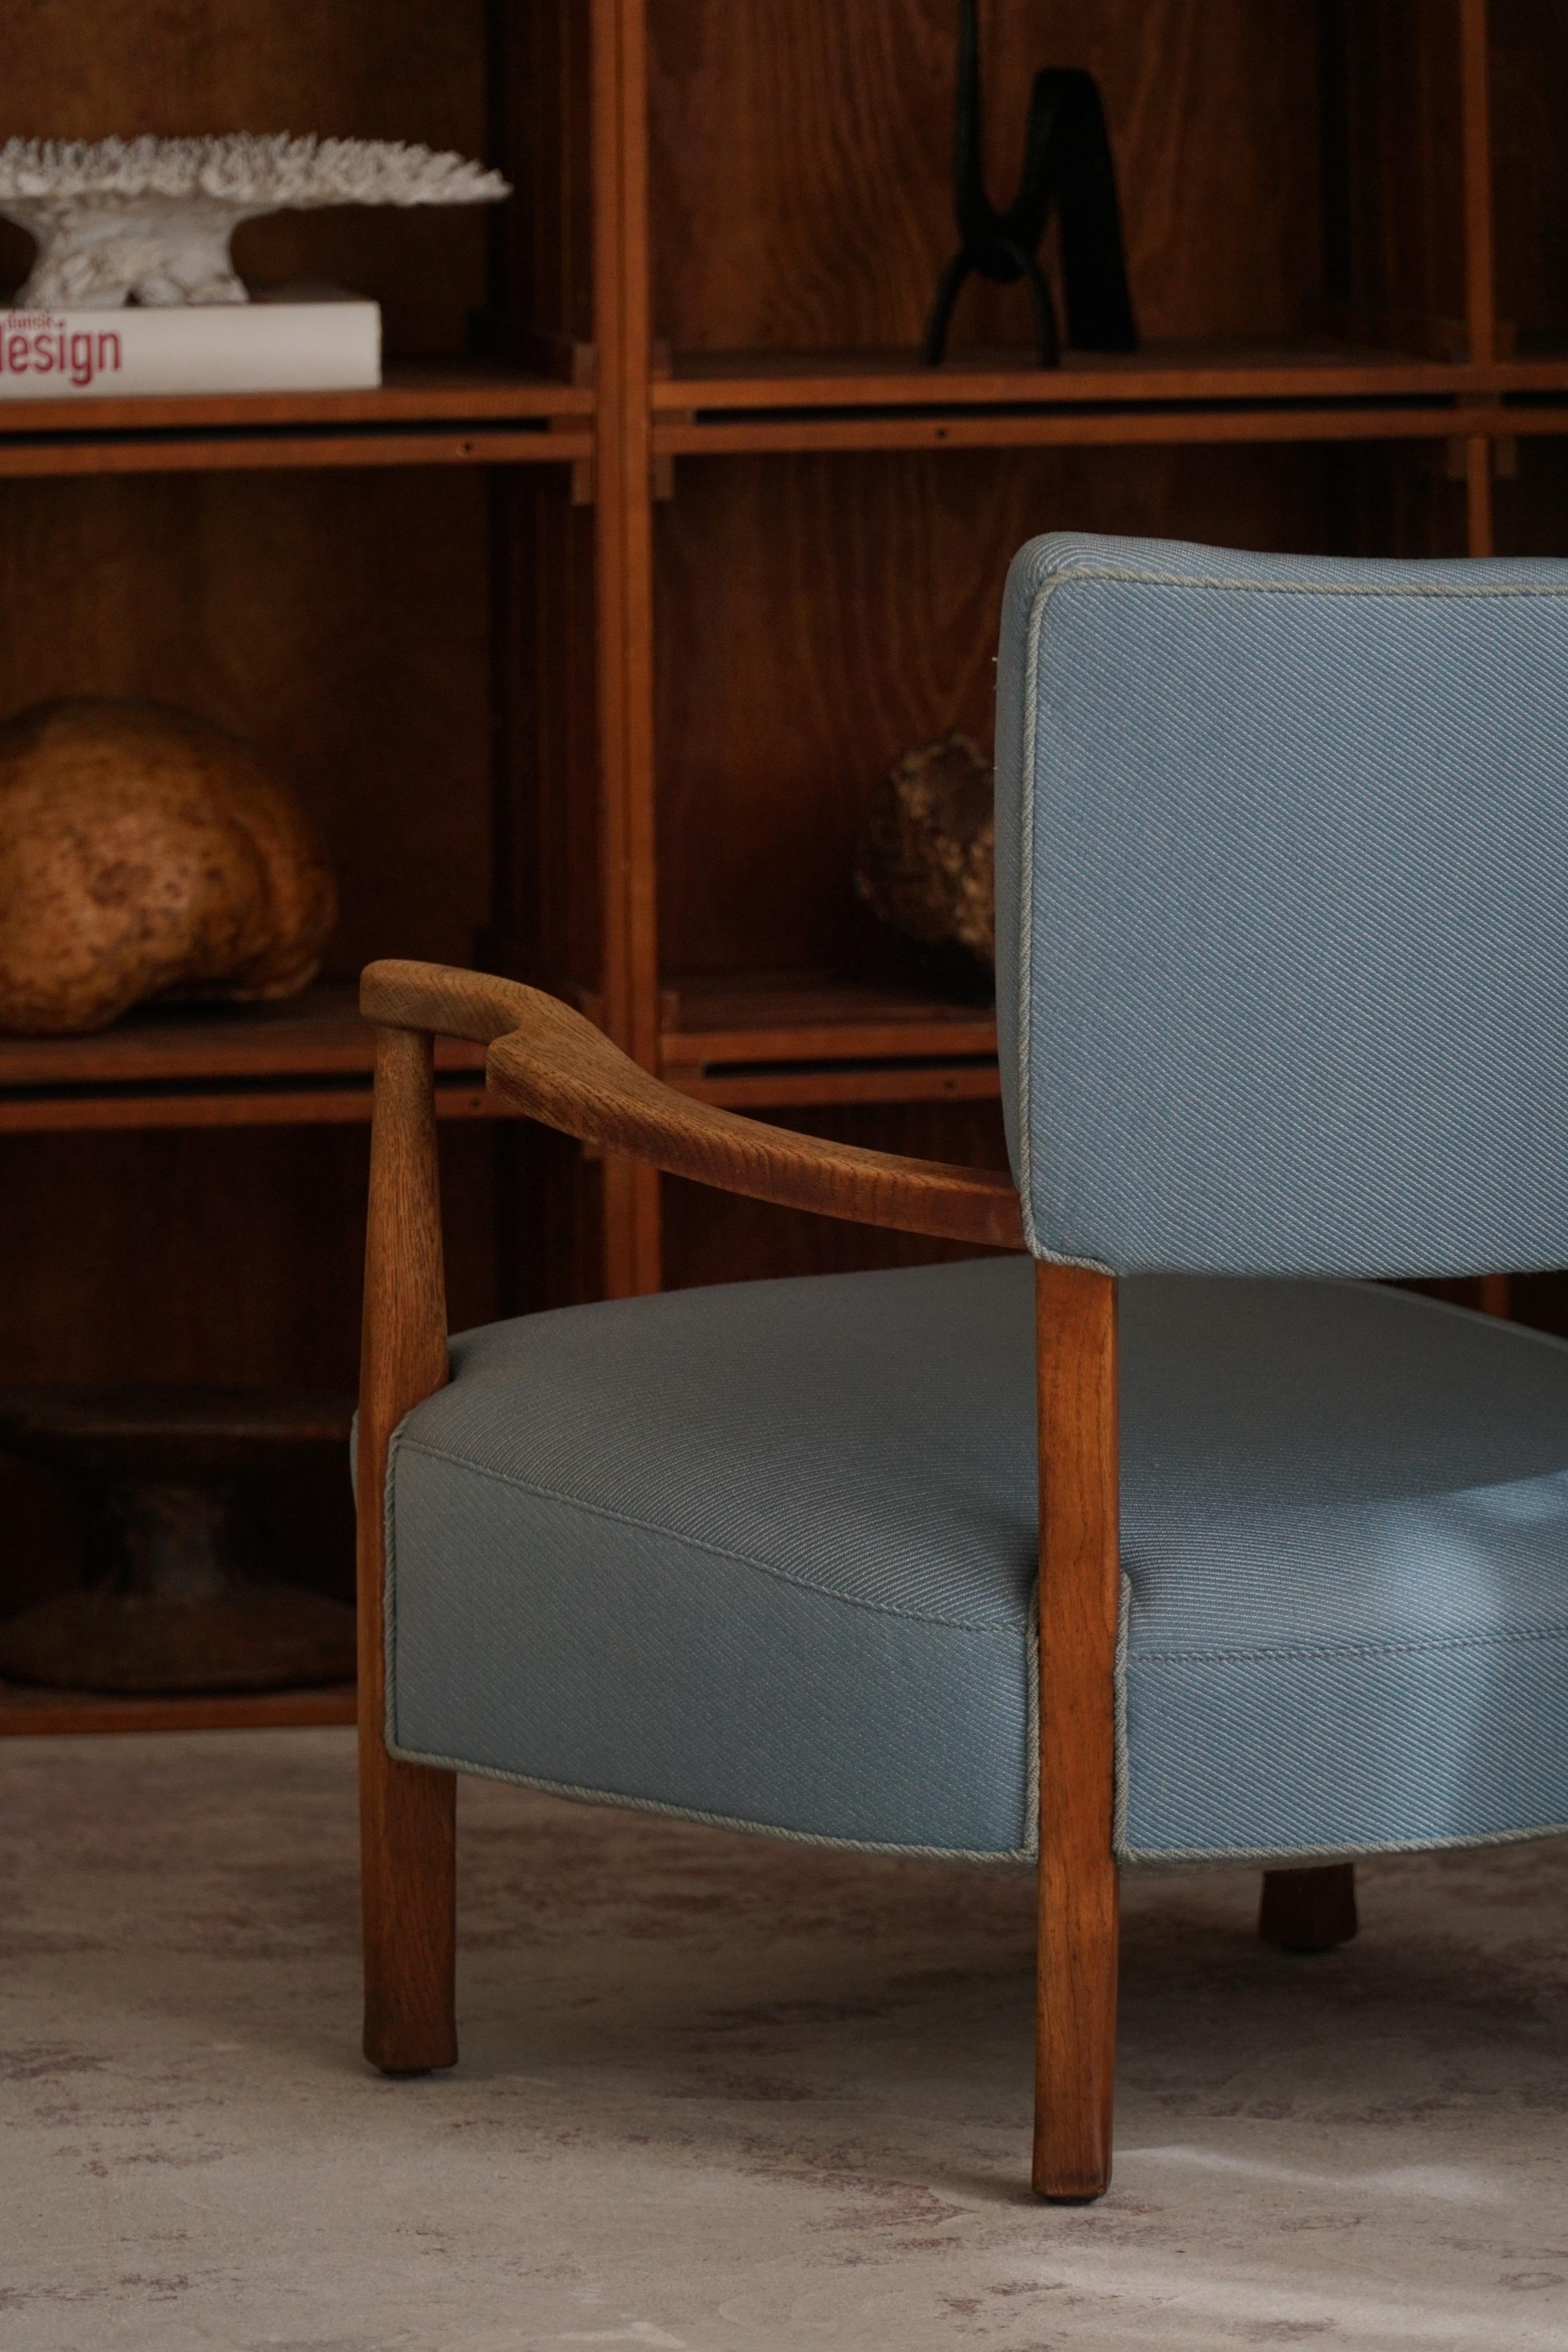 Danish Modern, Curved Lounge Chair in Oak, Attributed to Viggo Boesen, 1950s For Sale 13